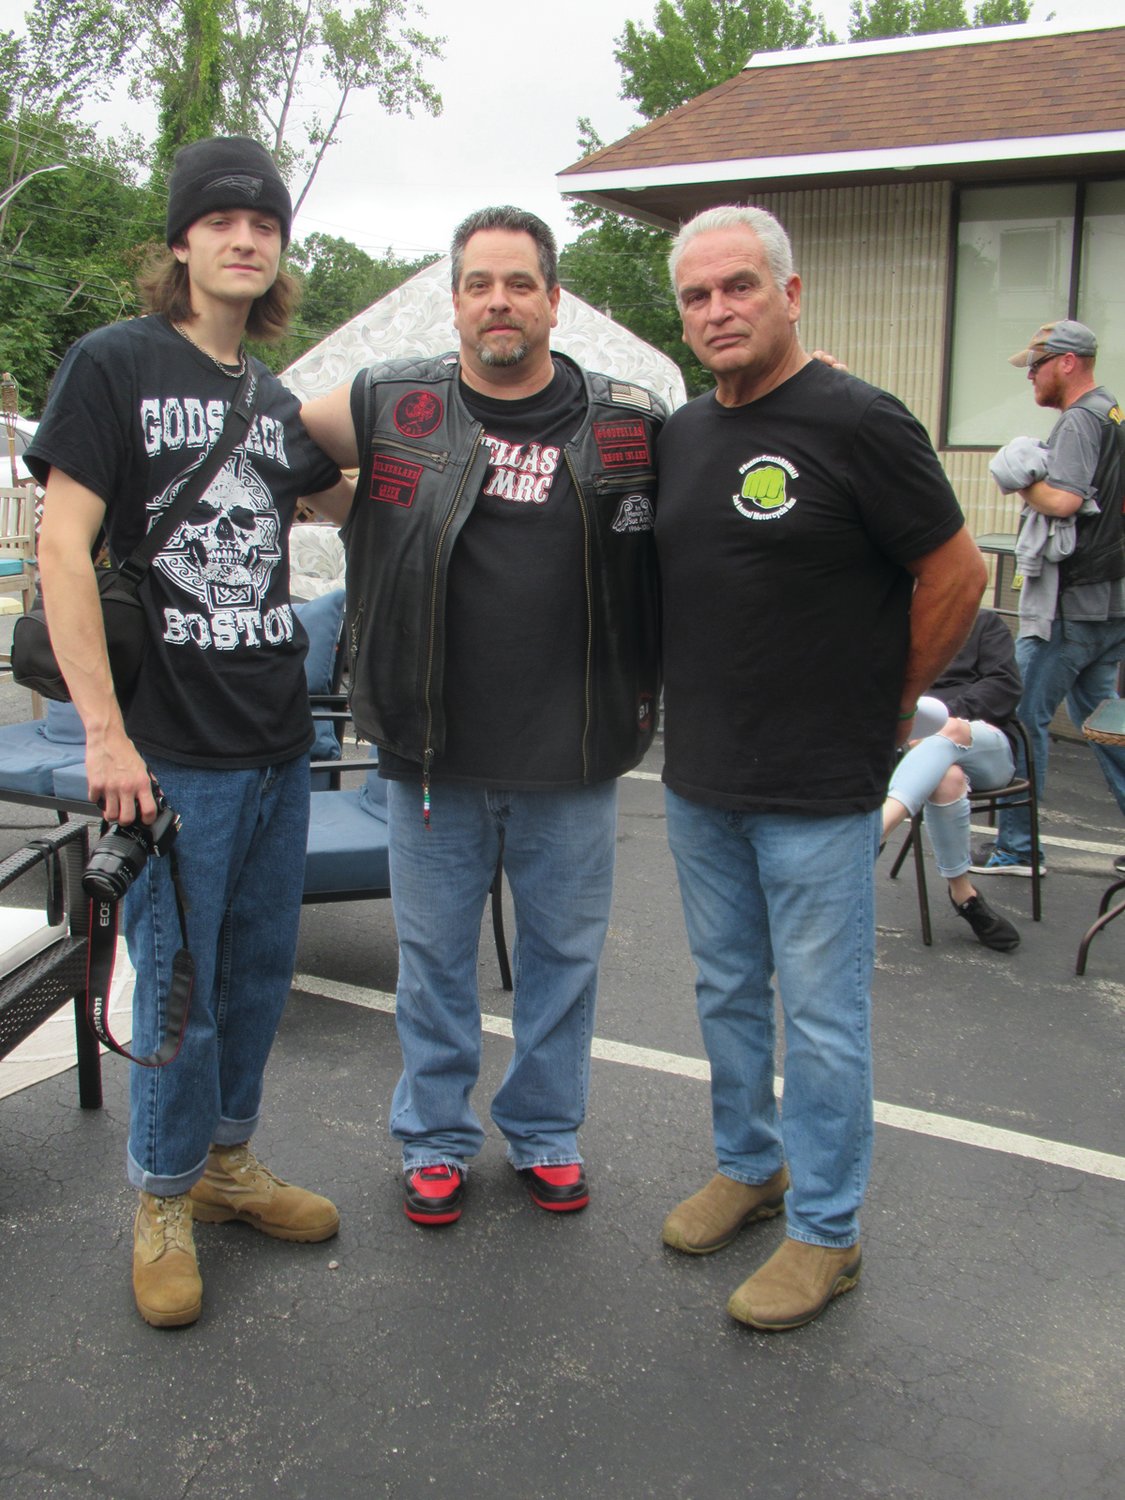 PRESIDENT’S PALS: Gene Benedetti (center), president of the Goodfellas Motorcycle Club, is joined by his son Dimitri, a former class president at Johnston High School and Al Topp from the VFW Post in Warwick.